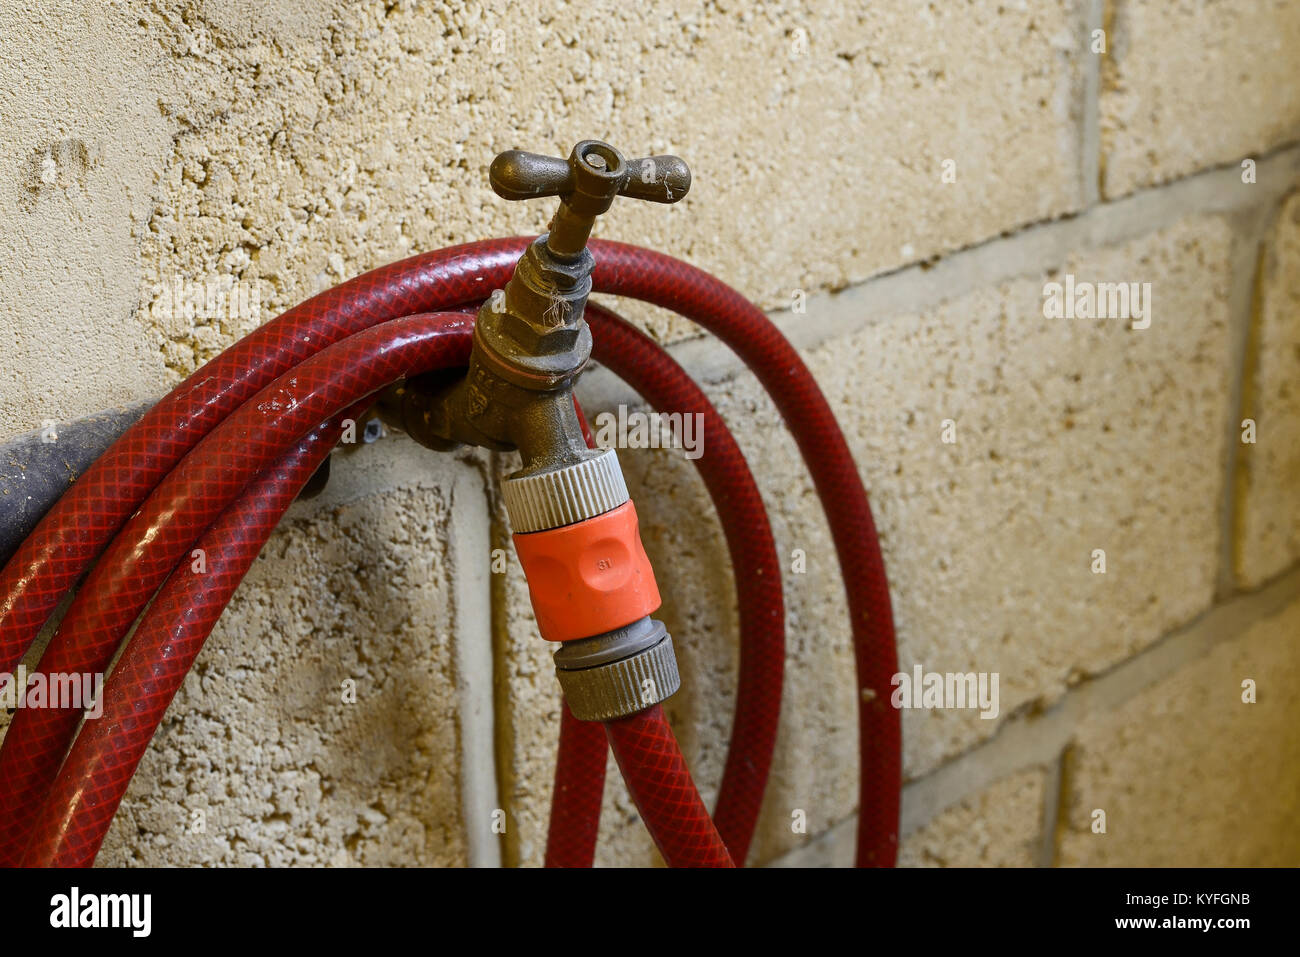 Garden tap and hosepipe inside a garage Stock Photo